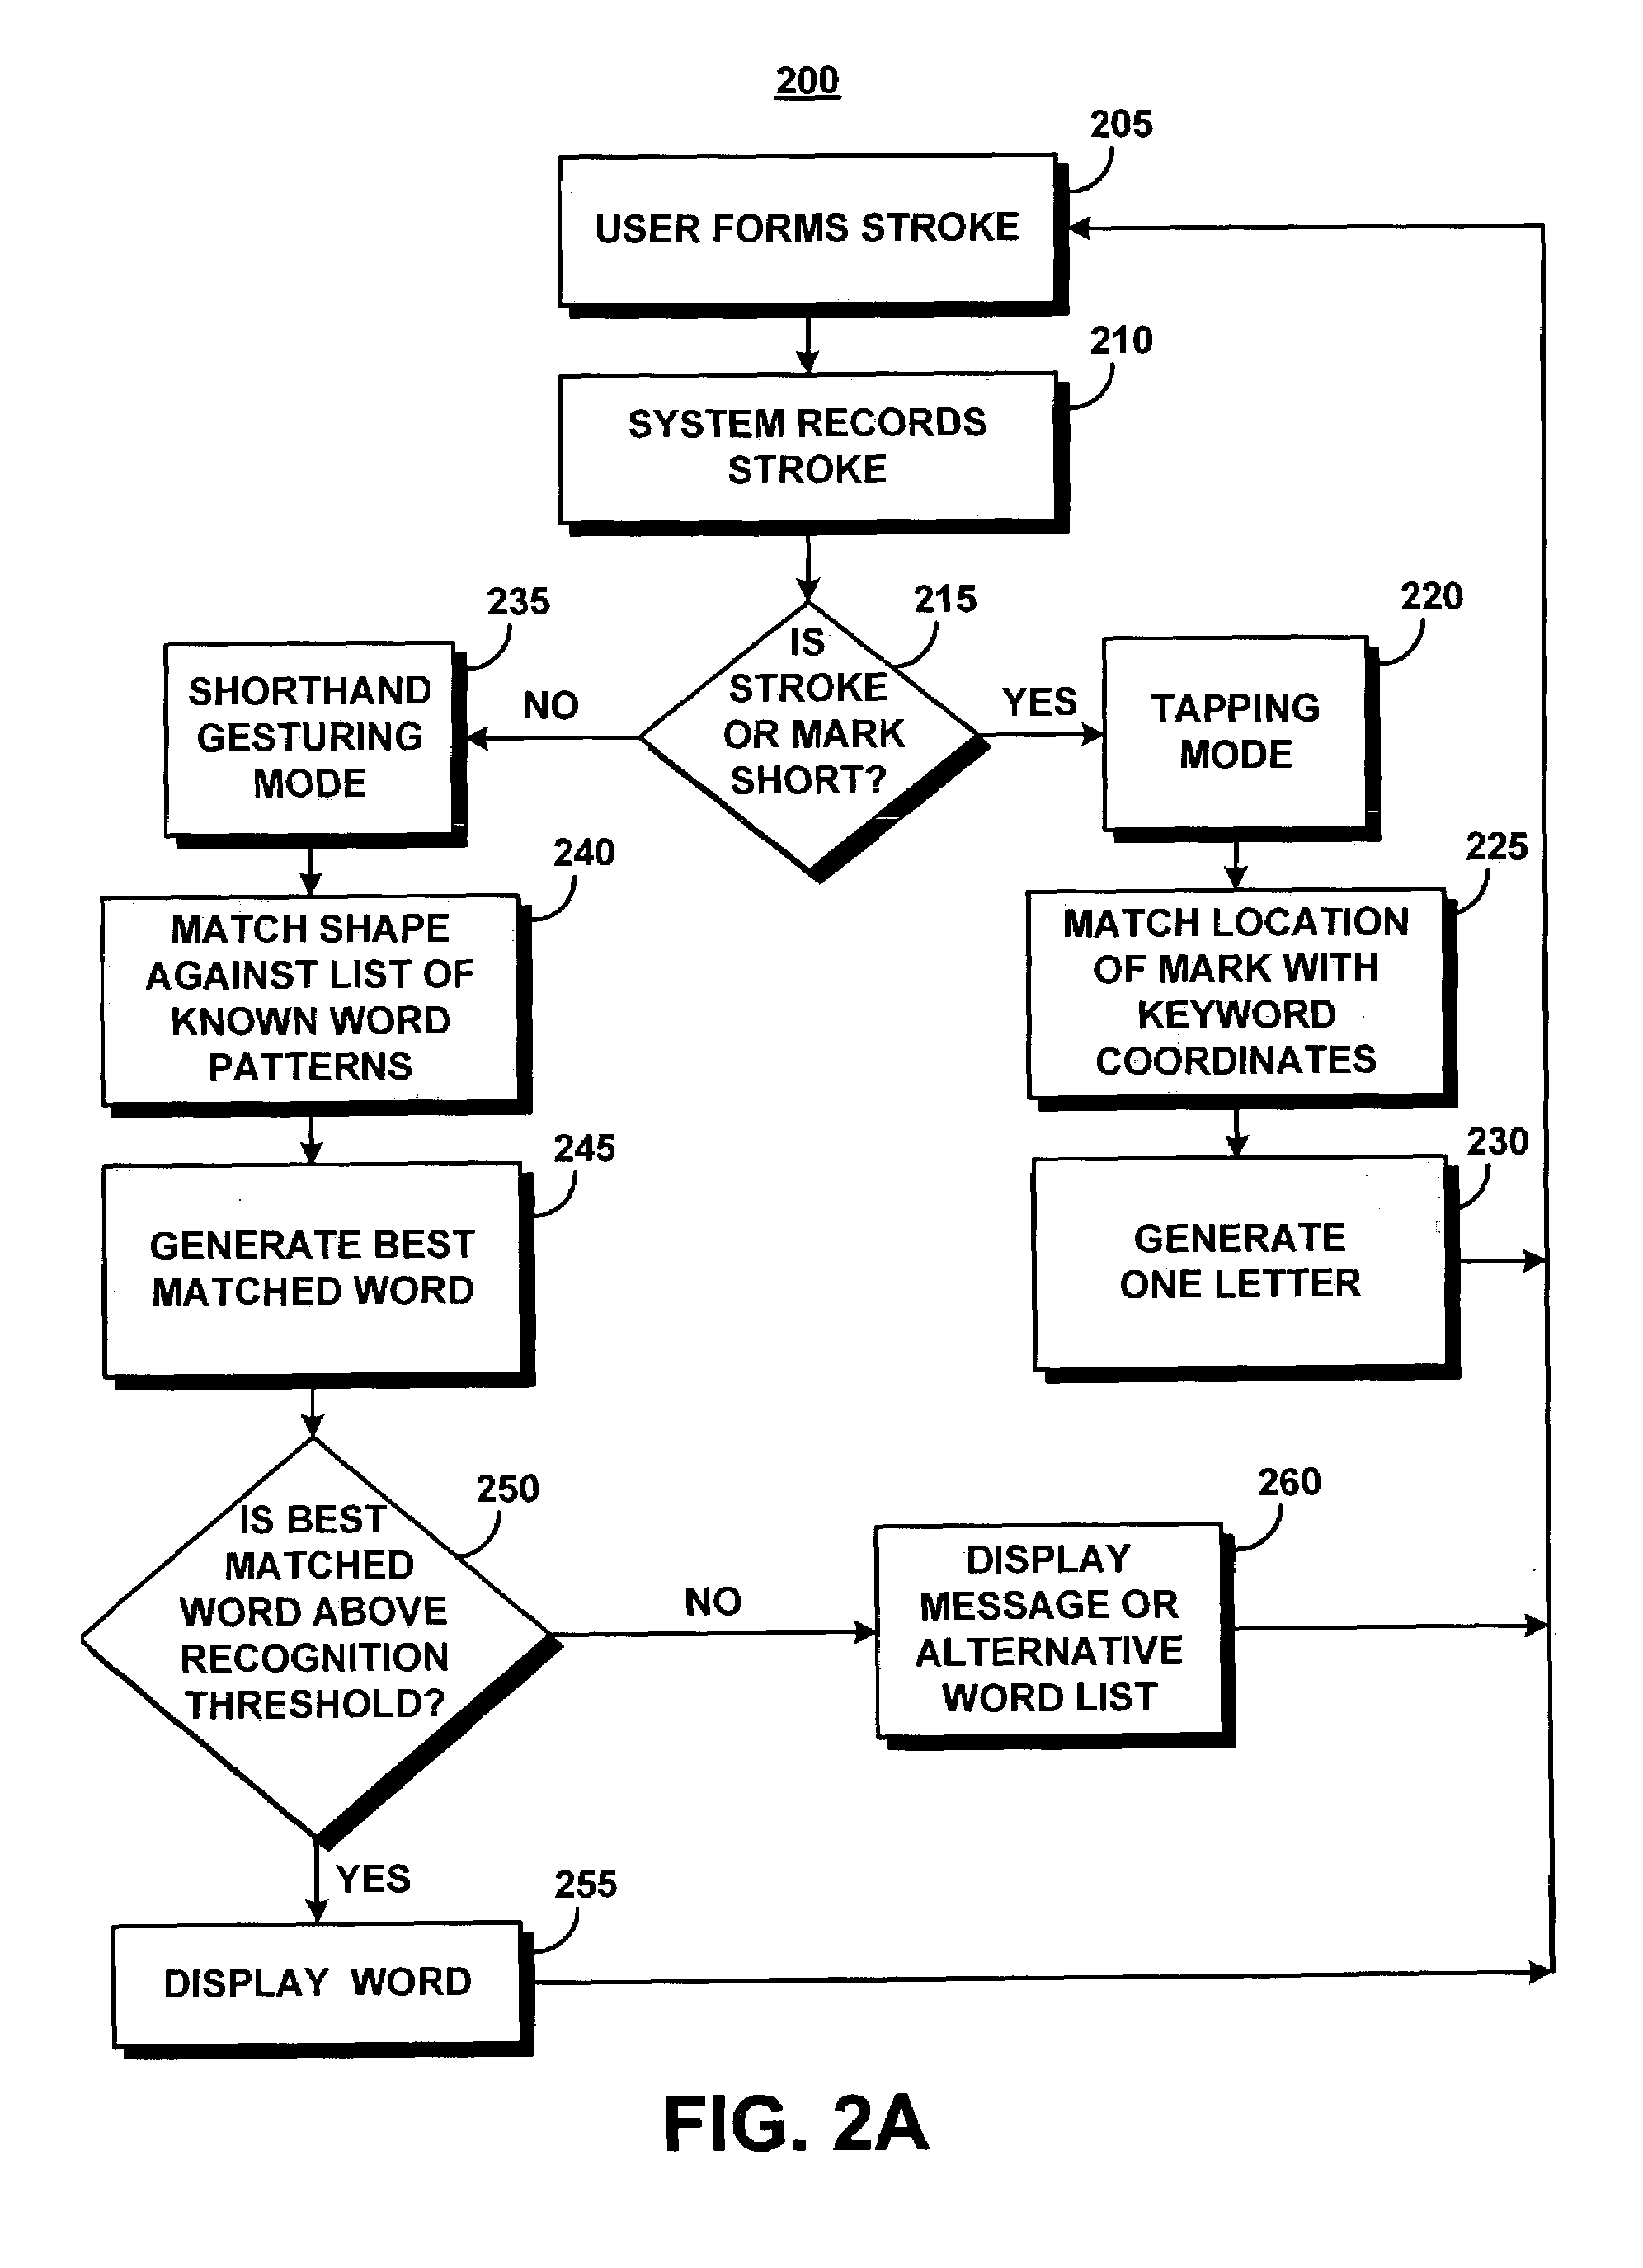 System and method for recognizing word patterns based on a virtual keyboard layout